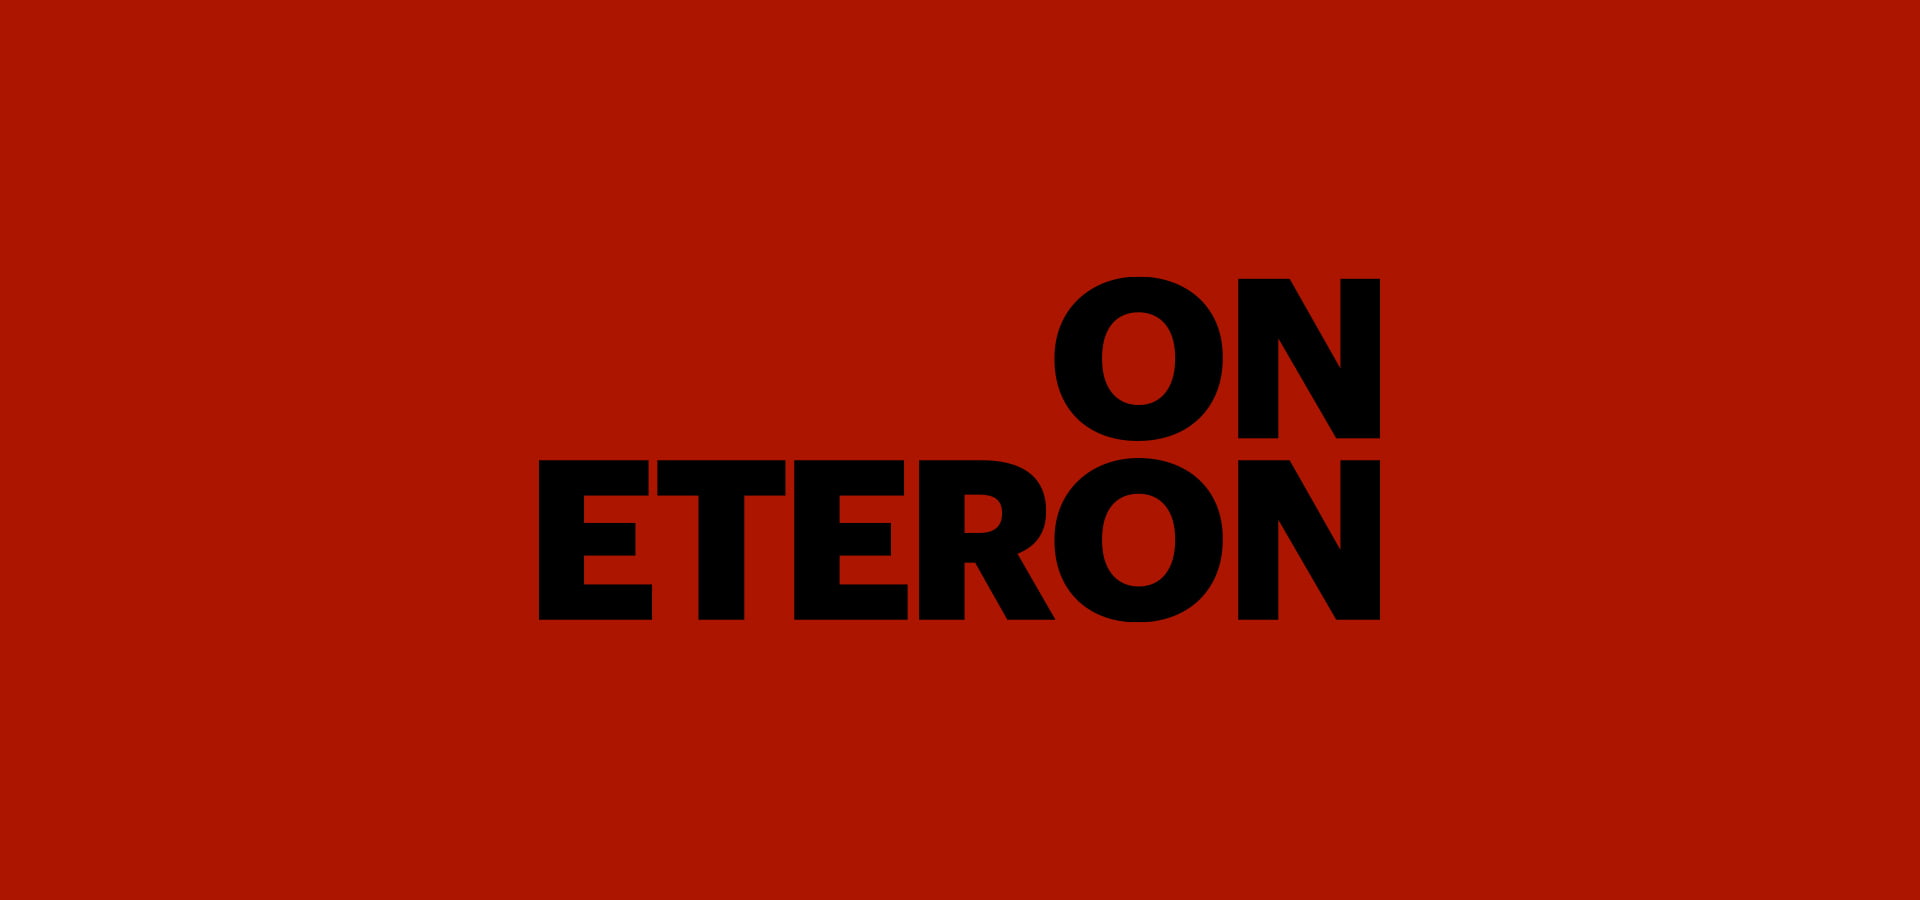 About - ETERON